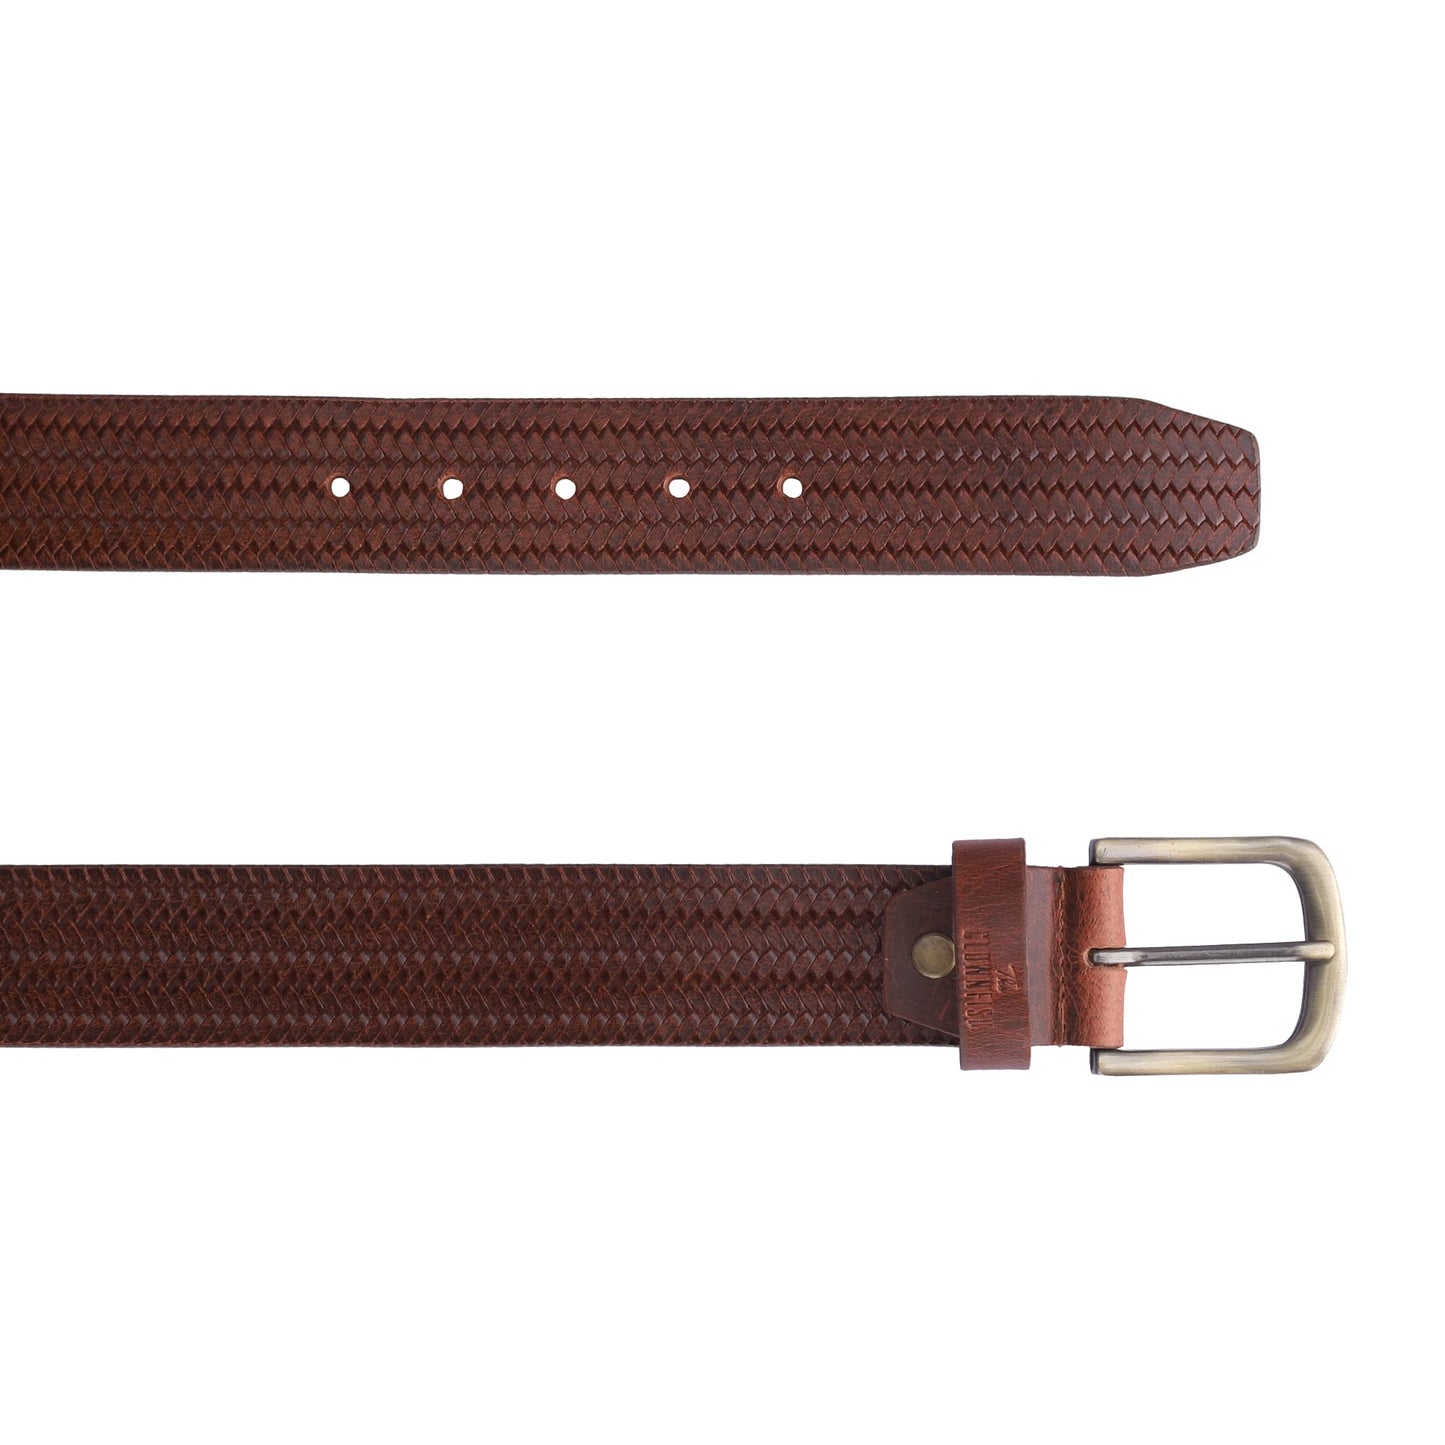 THE CLOWNFISH Men's Genuine Leather Belt with Textured/Embossed Design-Tan (Size-32 inches)